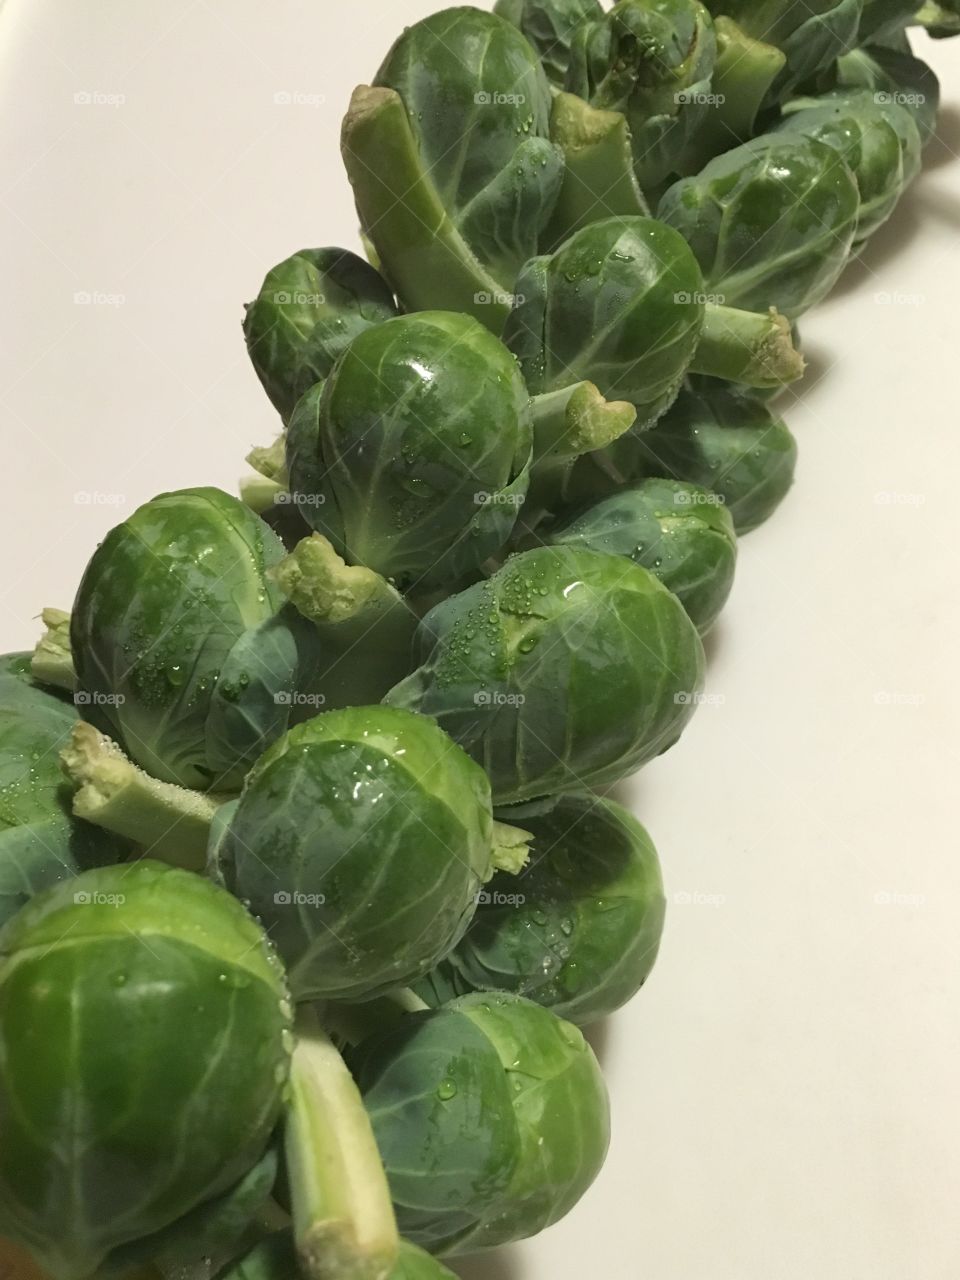 Brussels Sprouts on a Stalk